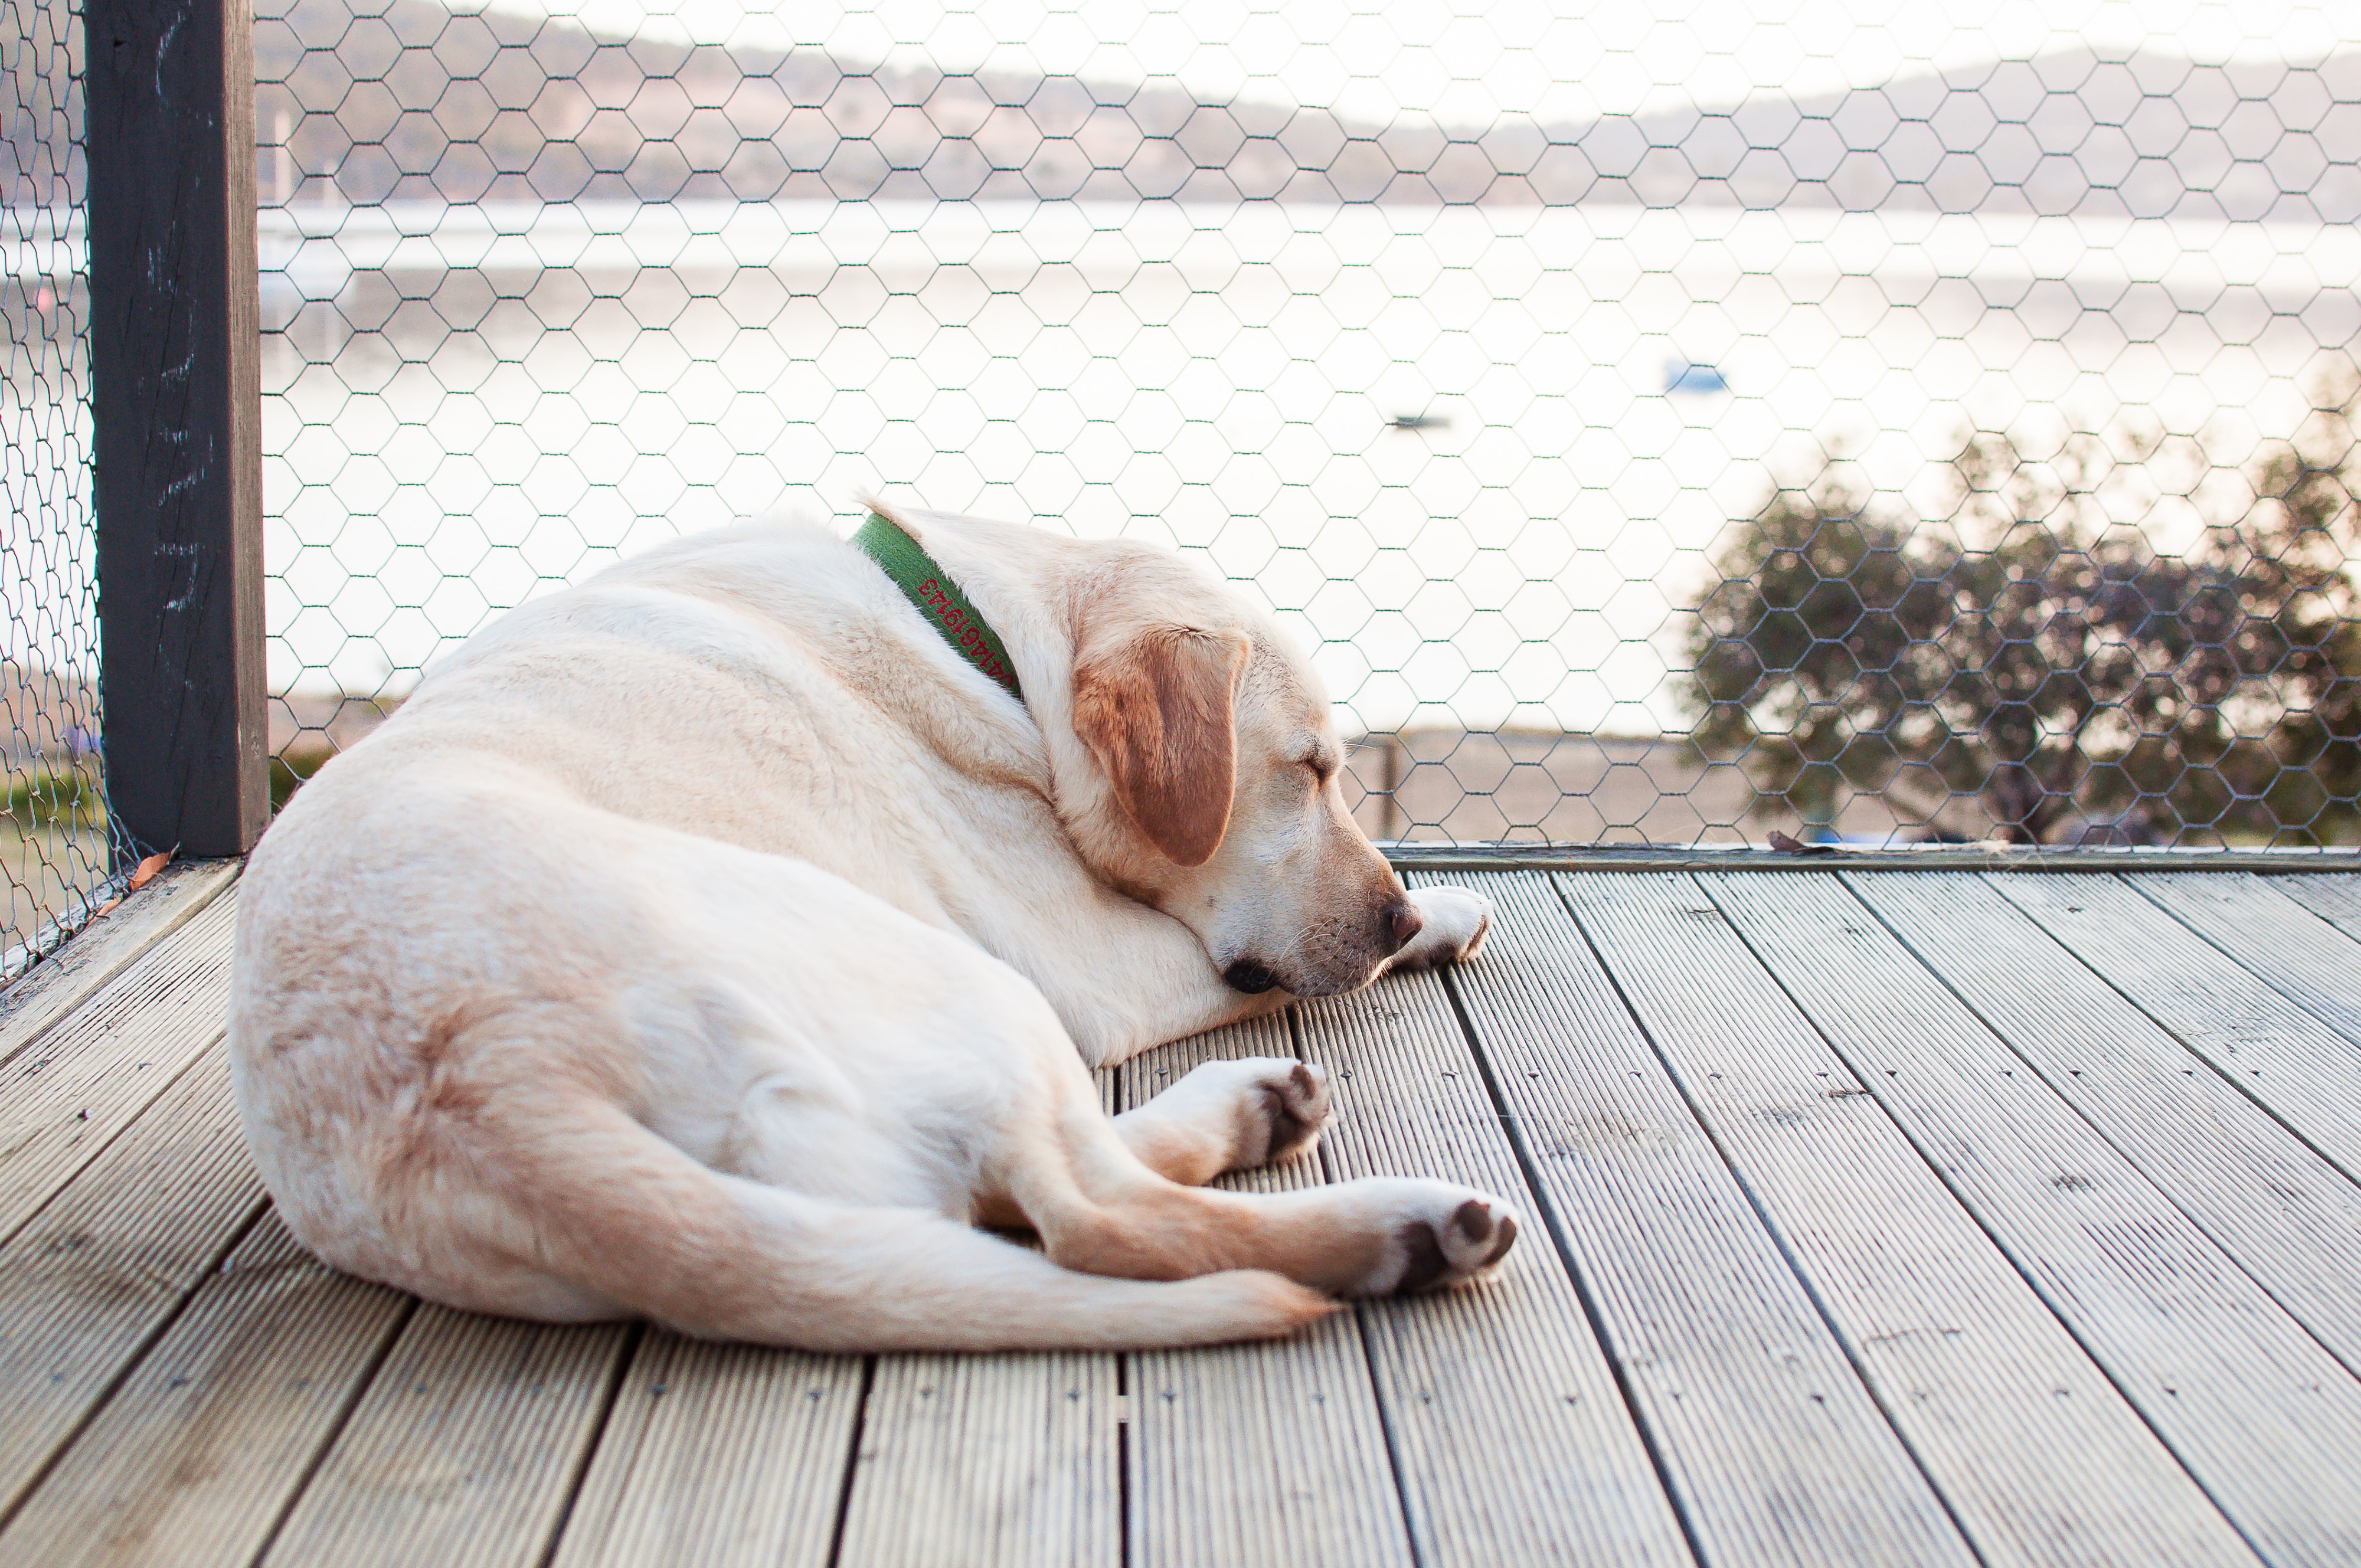 White shorthaired dog sleeping on wooden deck